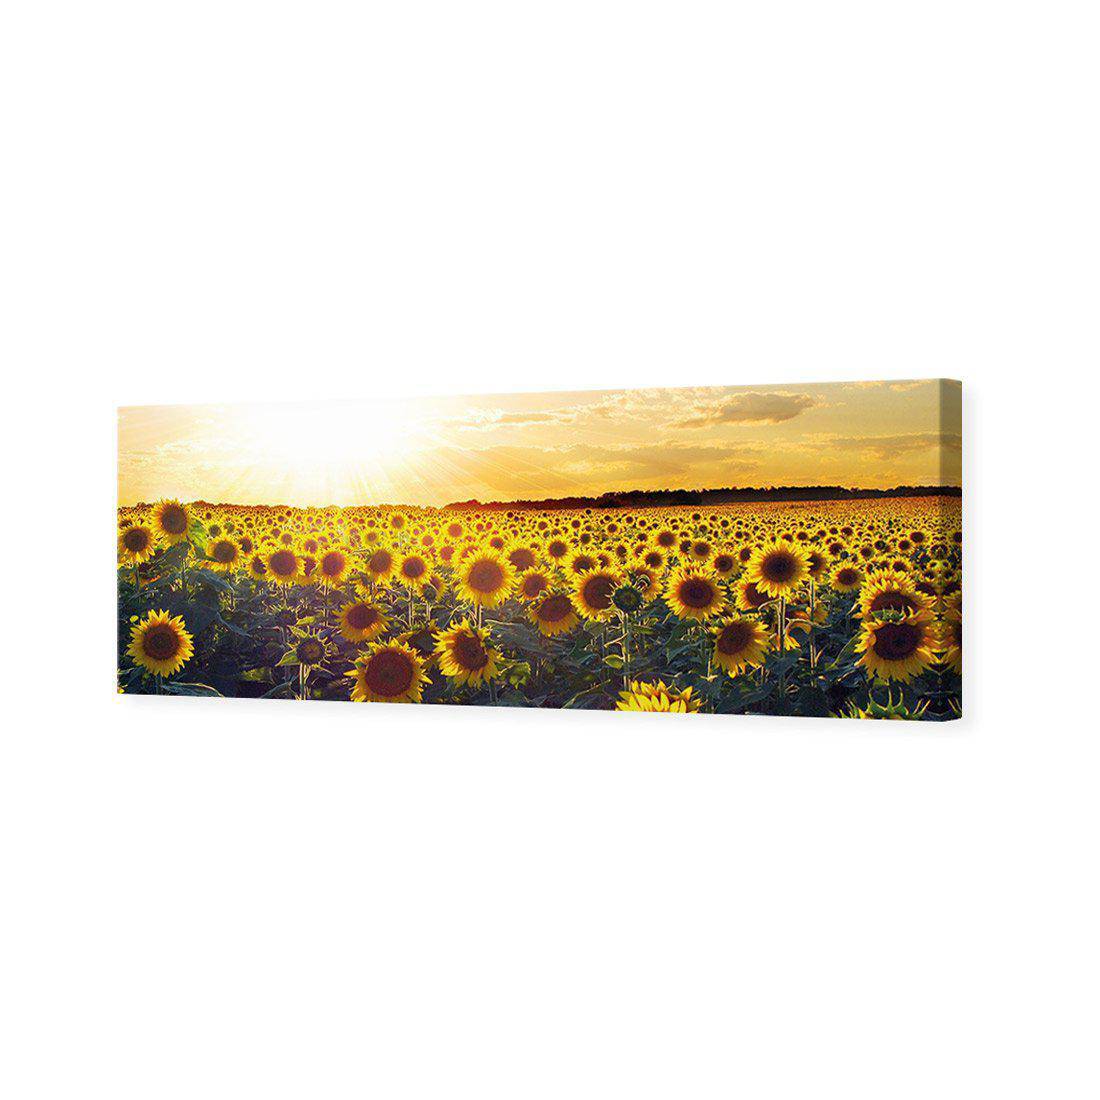 Sunflowers At Sunset Canvas Art-Canvas-Wall Art Designs-60x20cm-Canvas - No Frame-Wall Art Designs